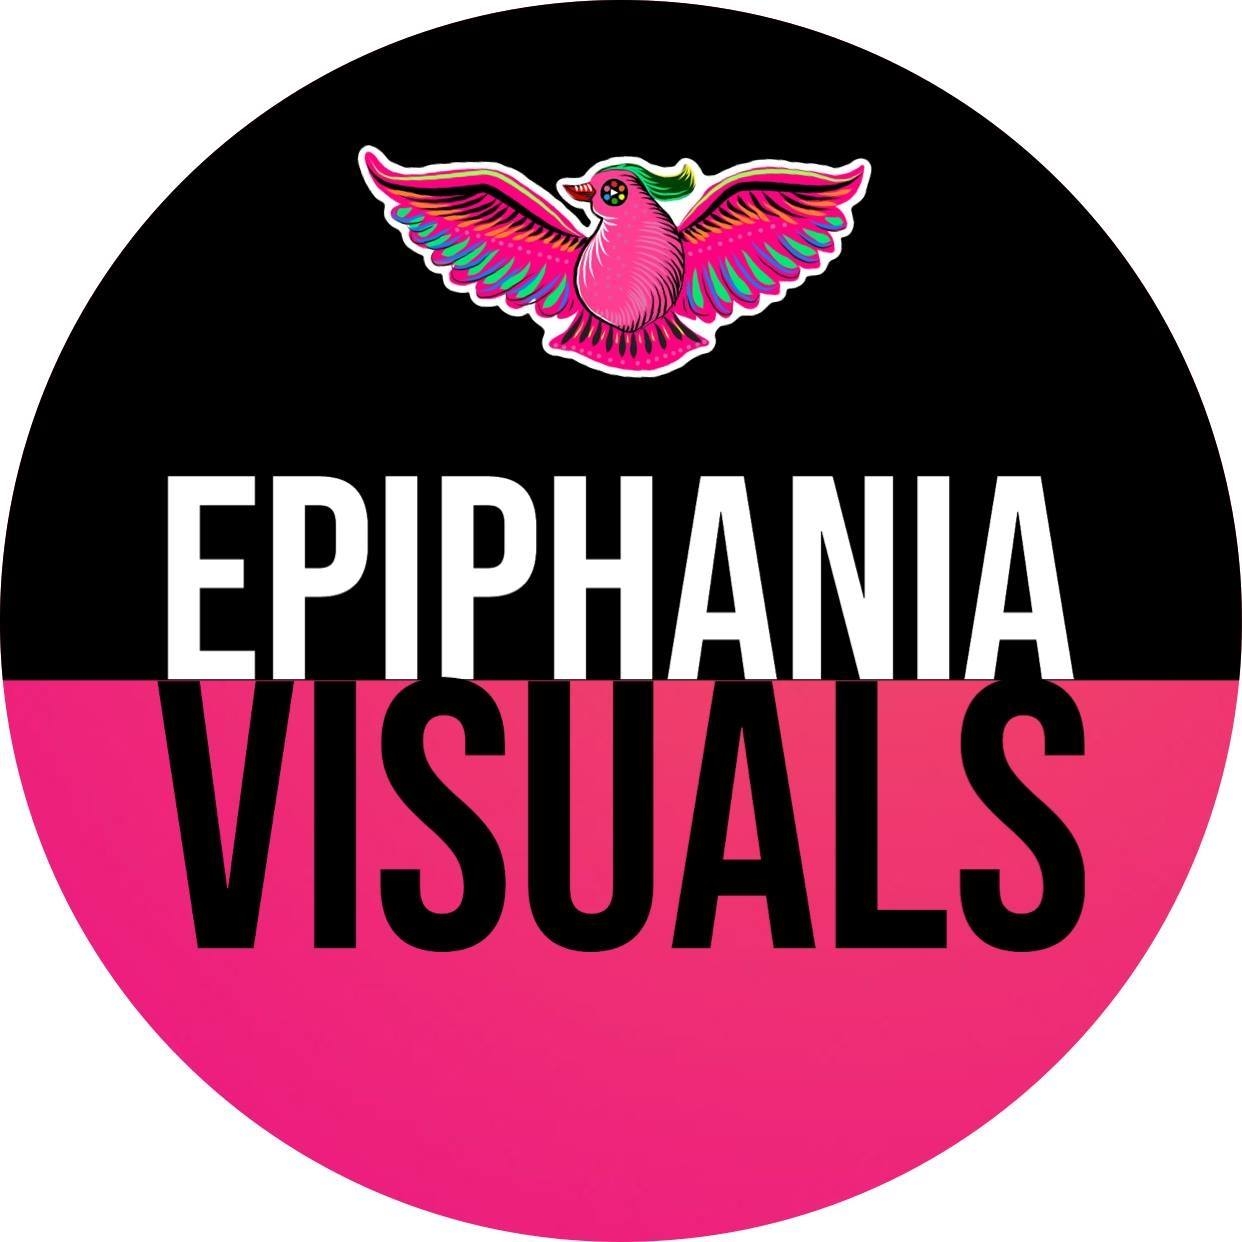 Epiphania Visual re-opening in October after a long break for Covid 19